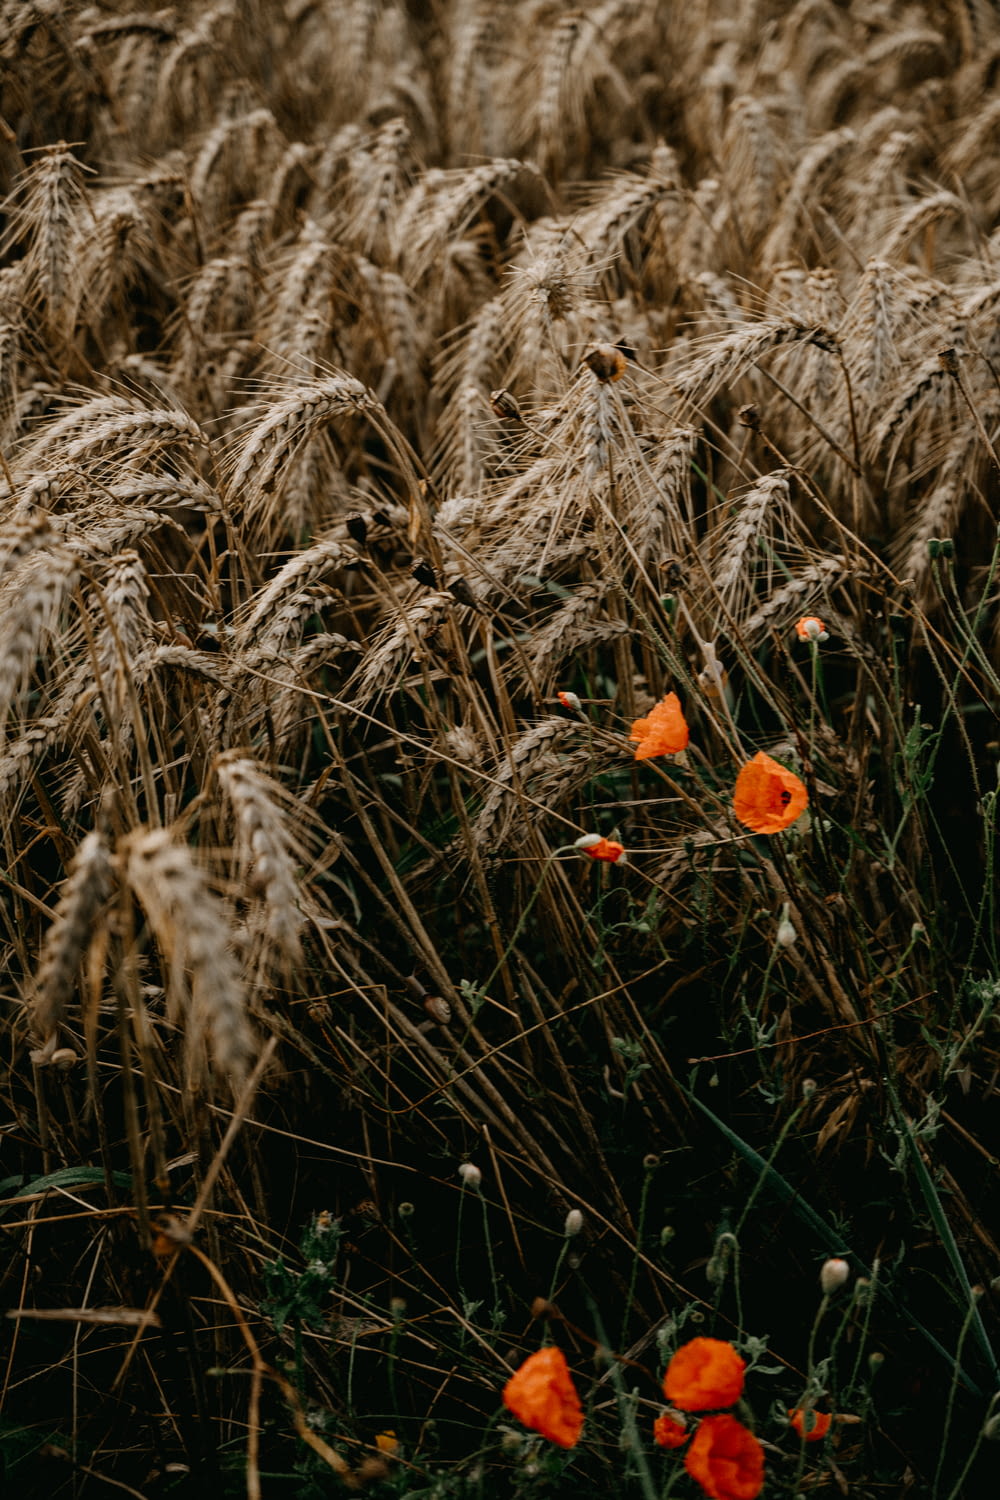 orange flower surrounded by brown wheat plants